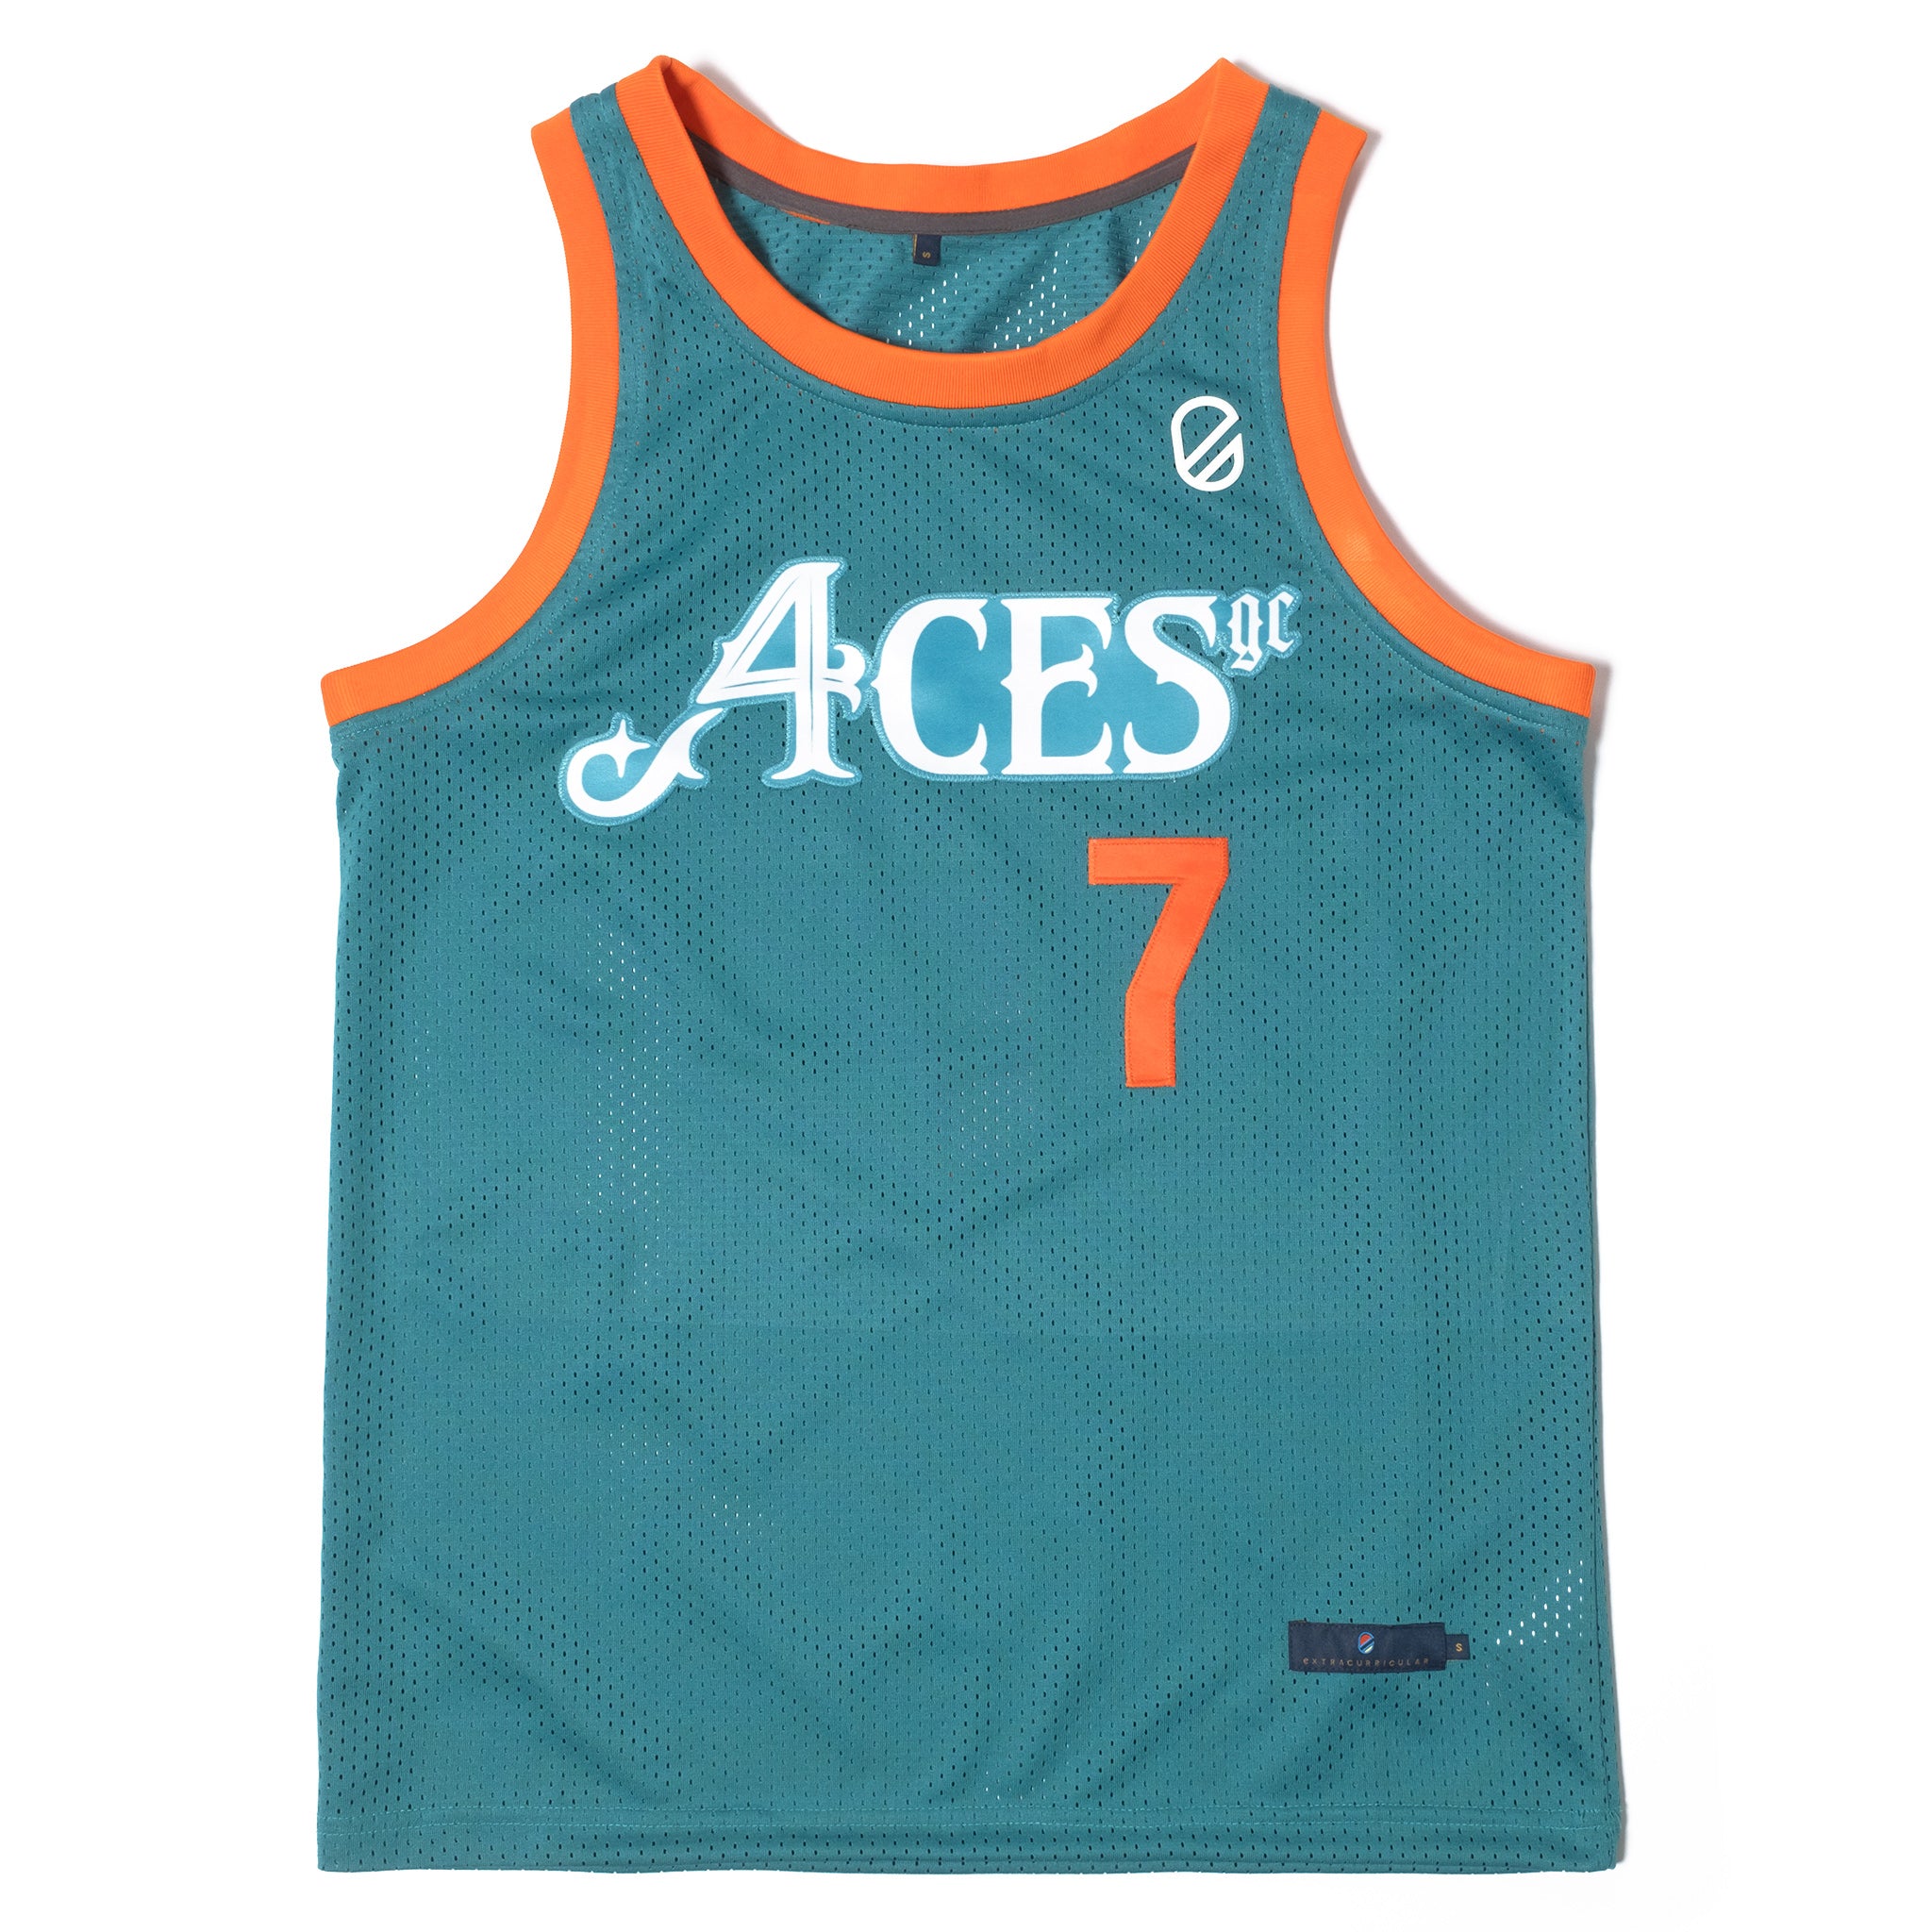 4ACES GC MIAMI JERSEY | #7 REED